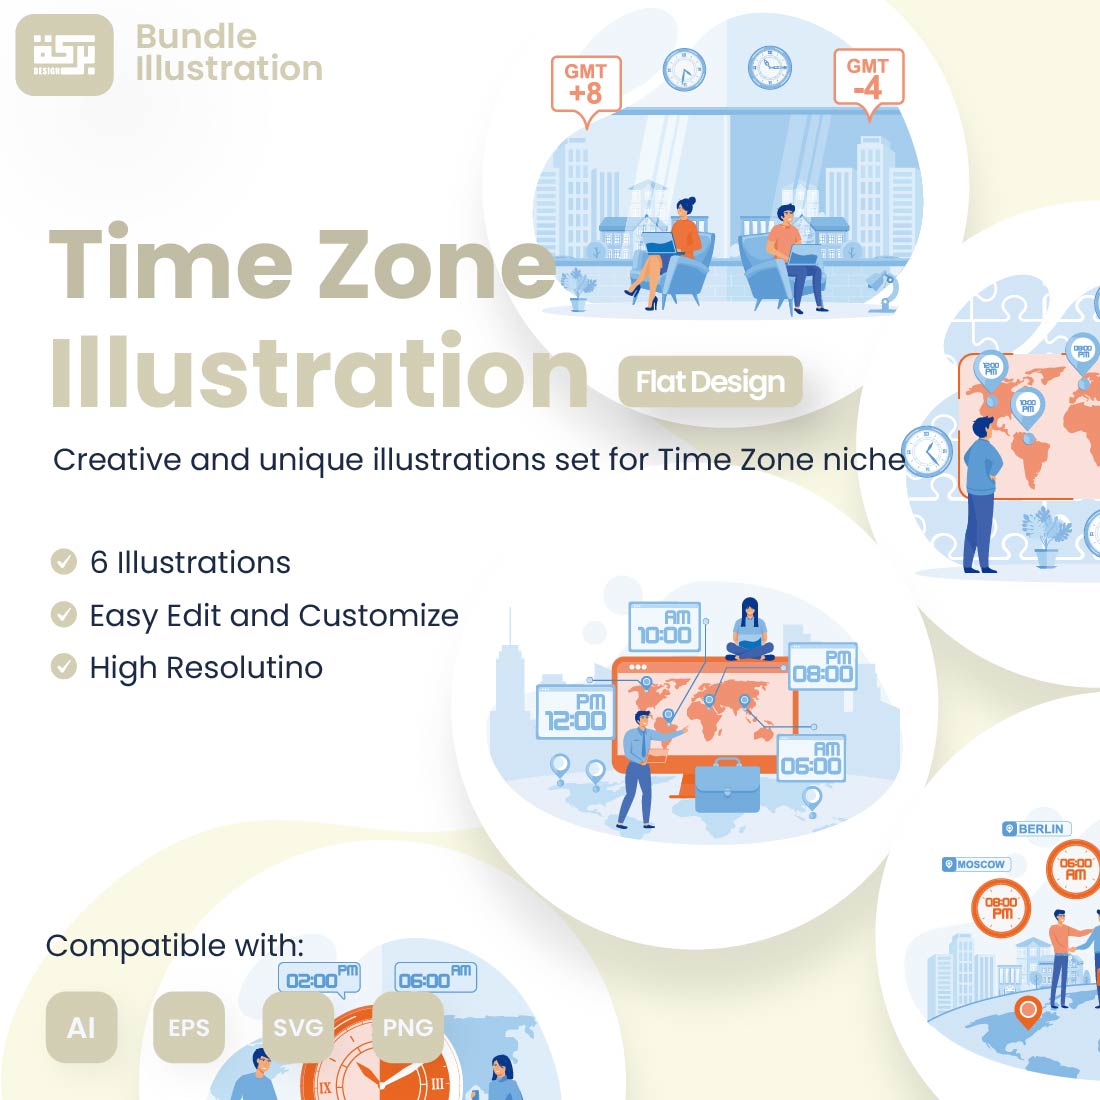 *Design Illustration of Time Zone cover image.